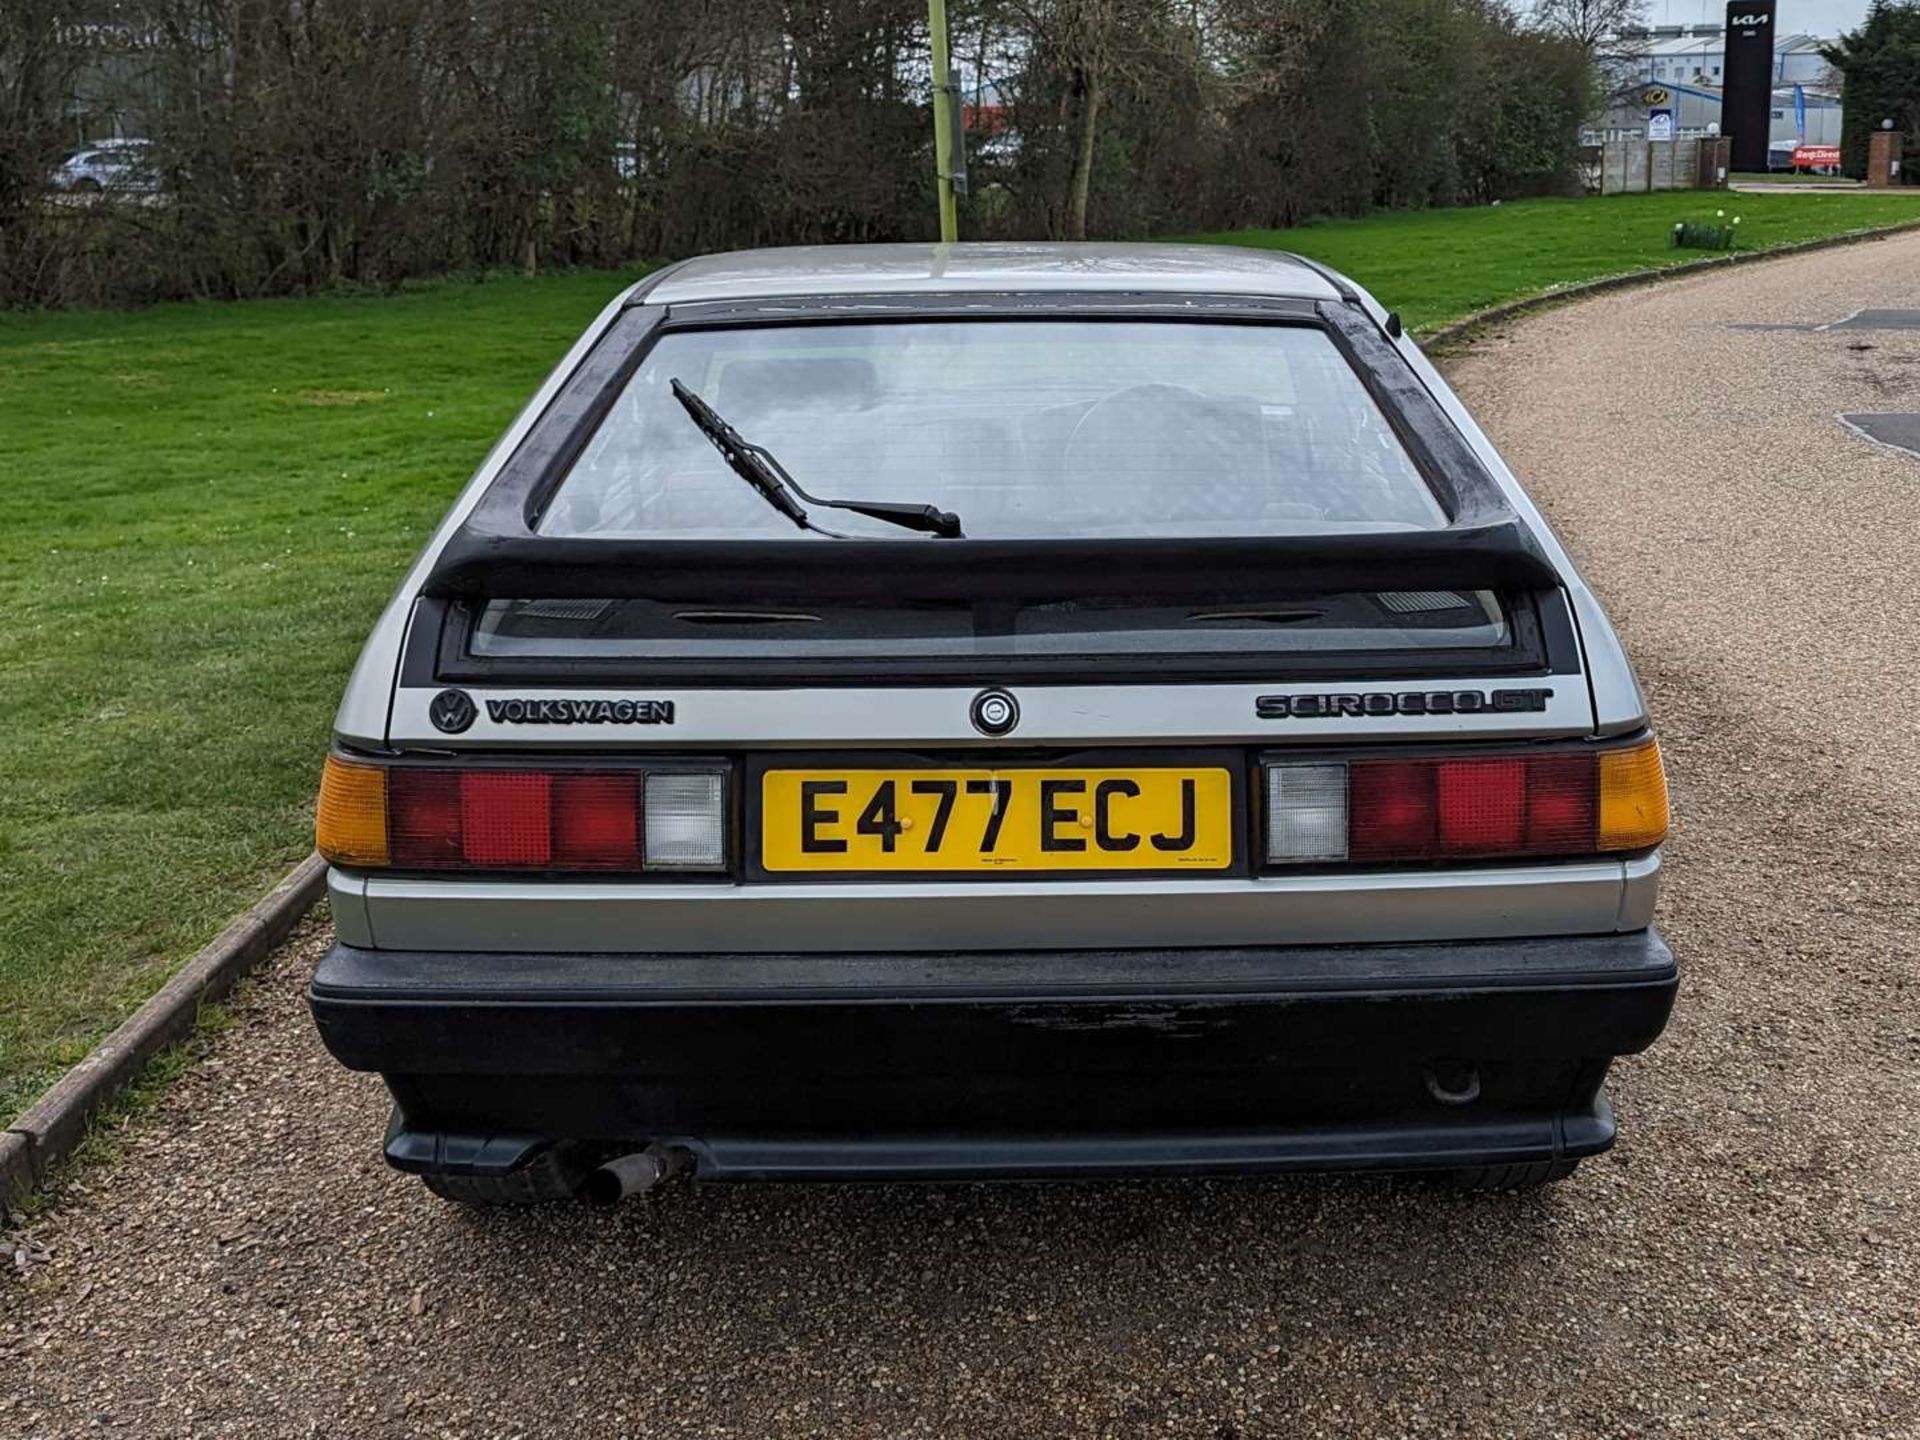 1987 VW SCIROCCO GT - Image 6 of 28